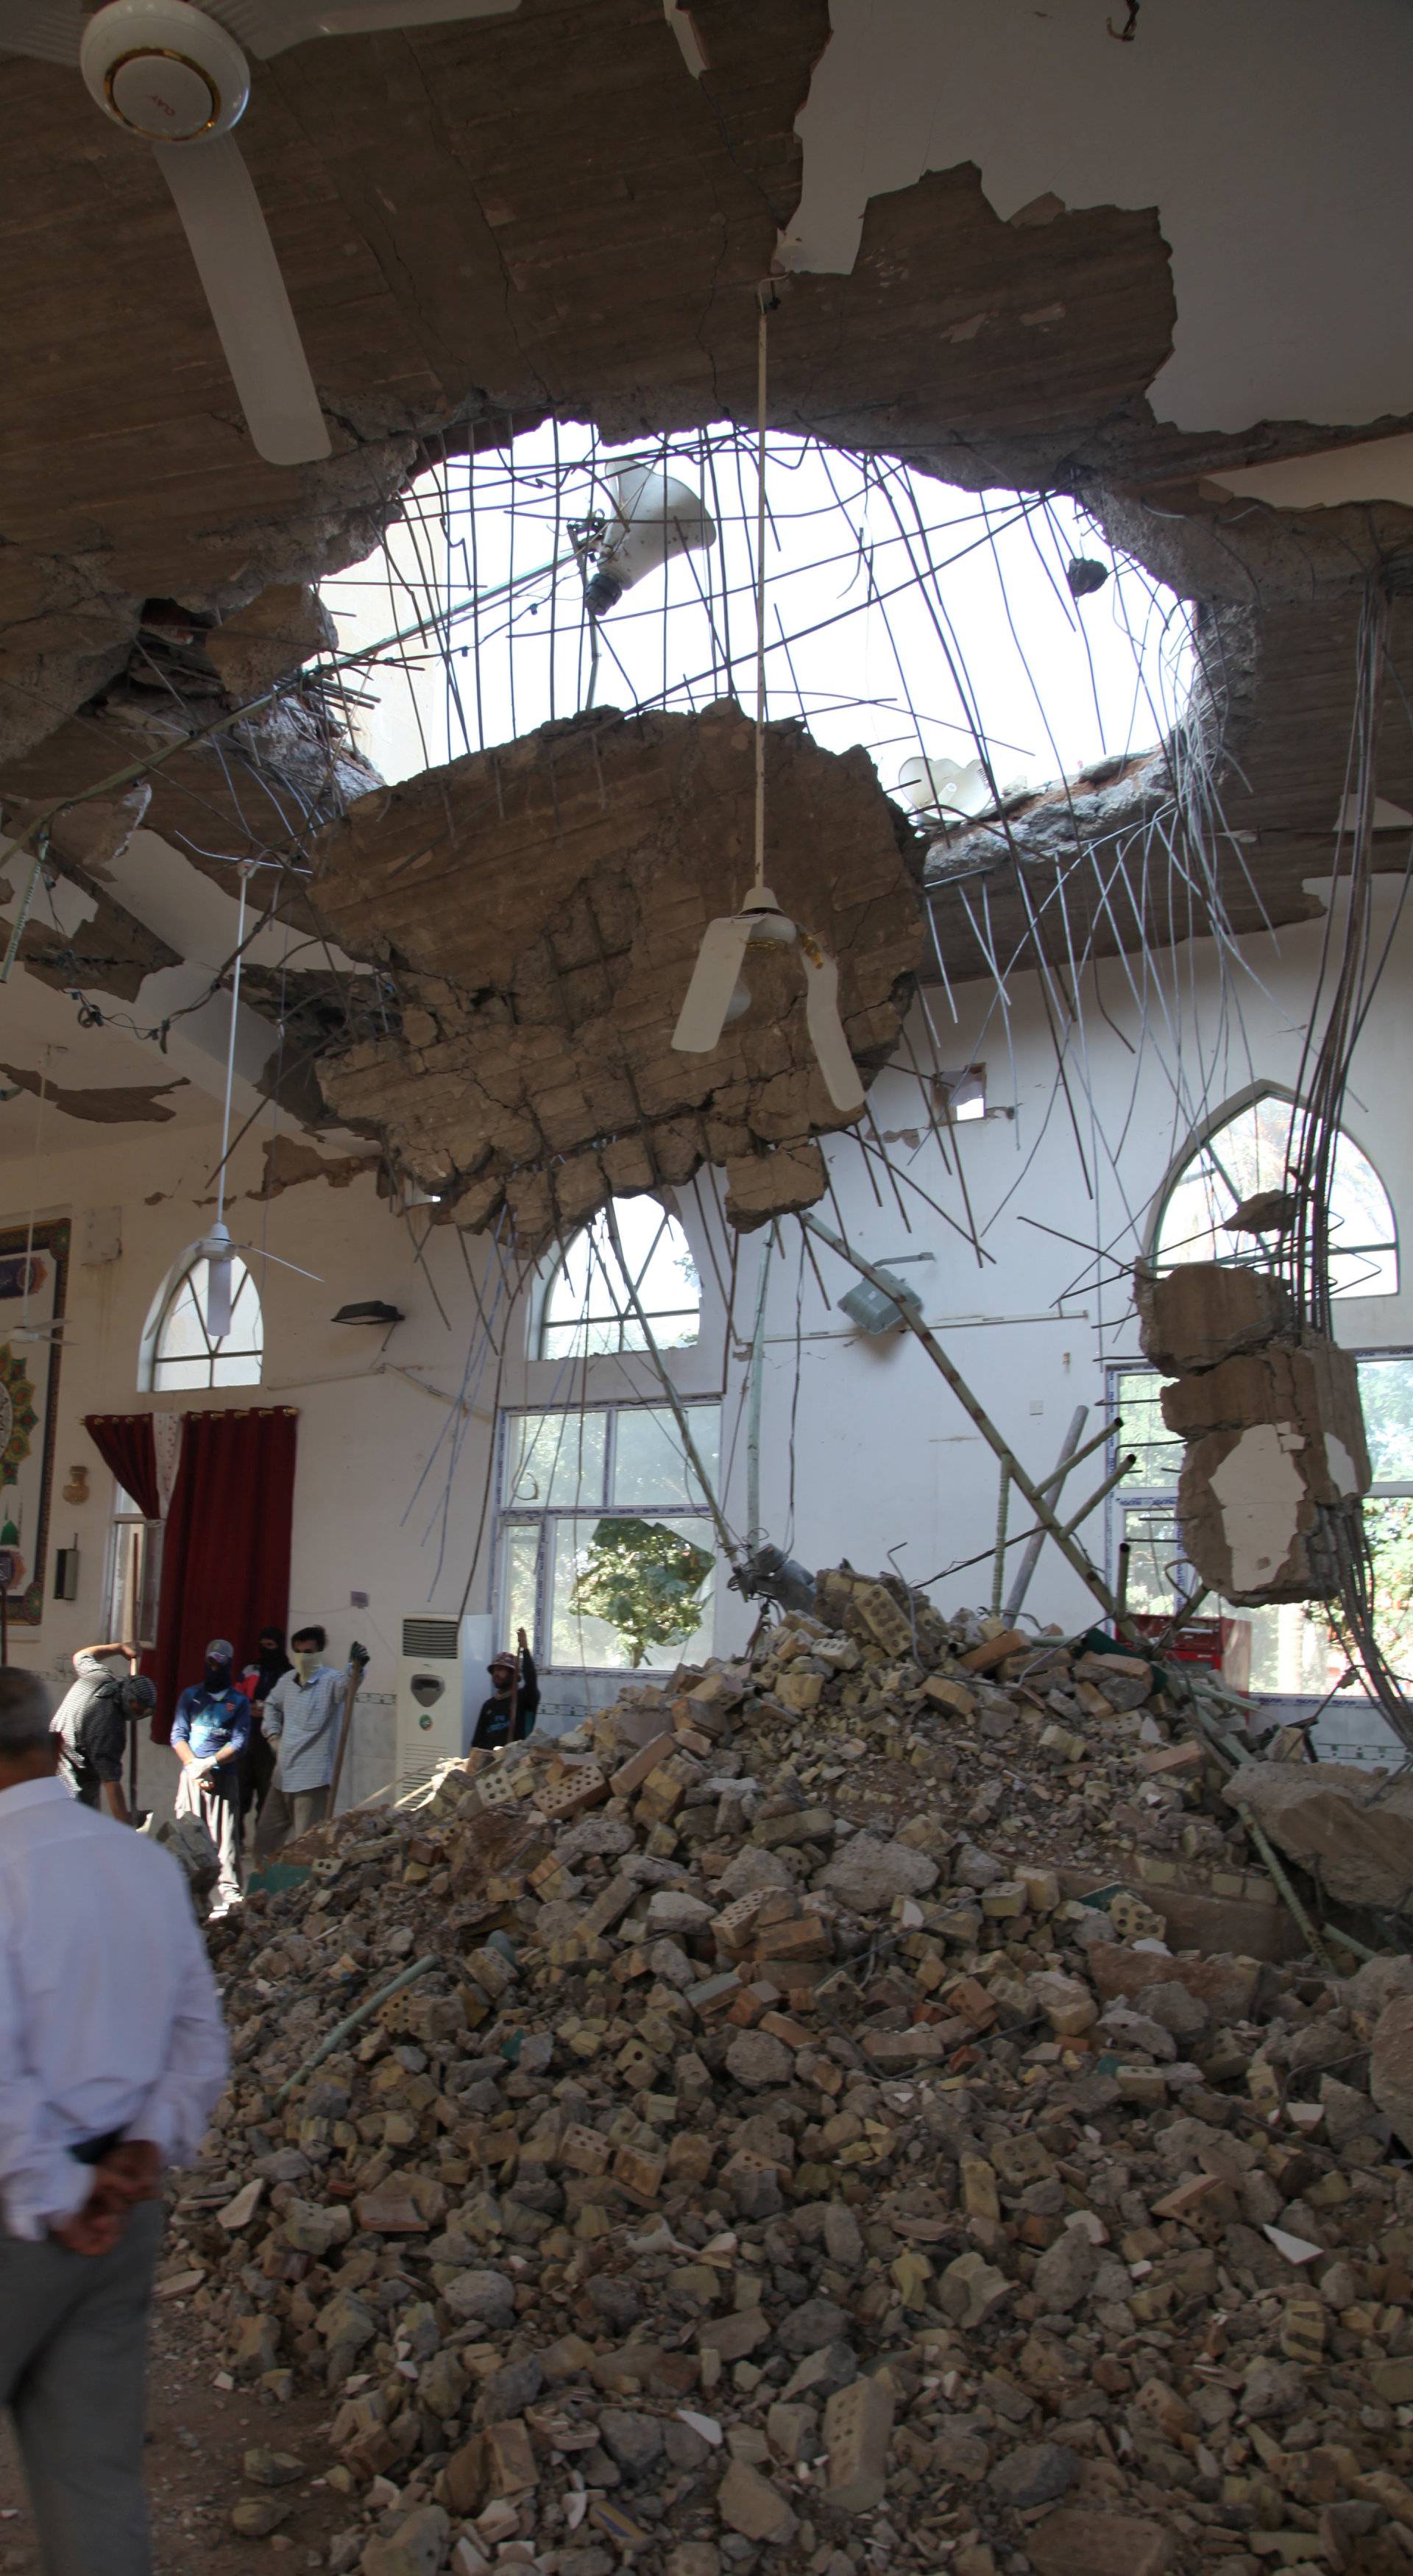 People remove rubble from a damaged mosque following an earthquake in Khanaqin